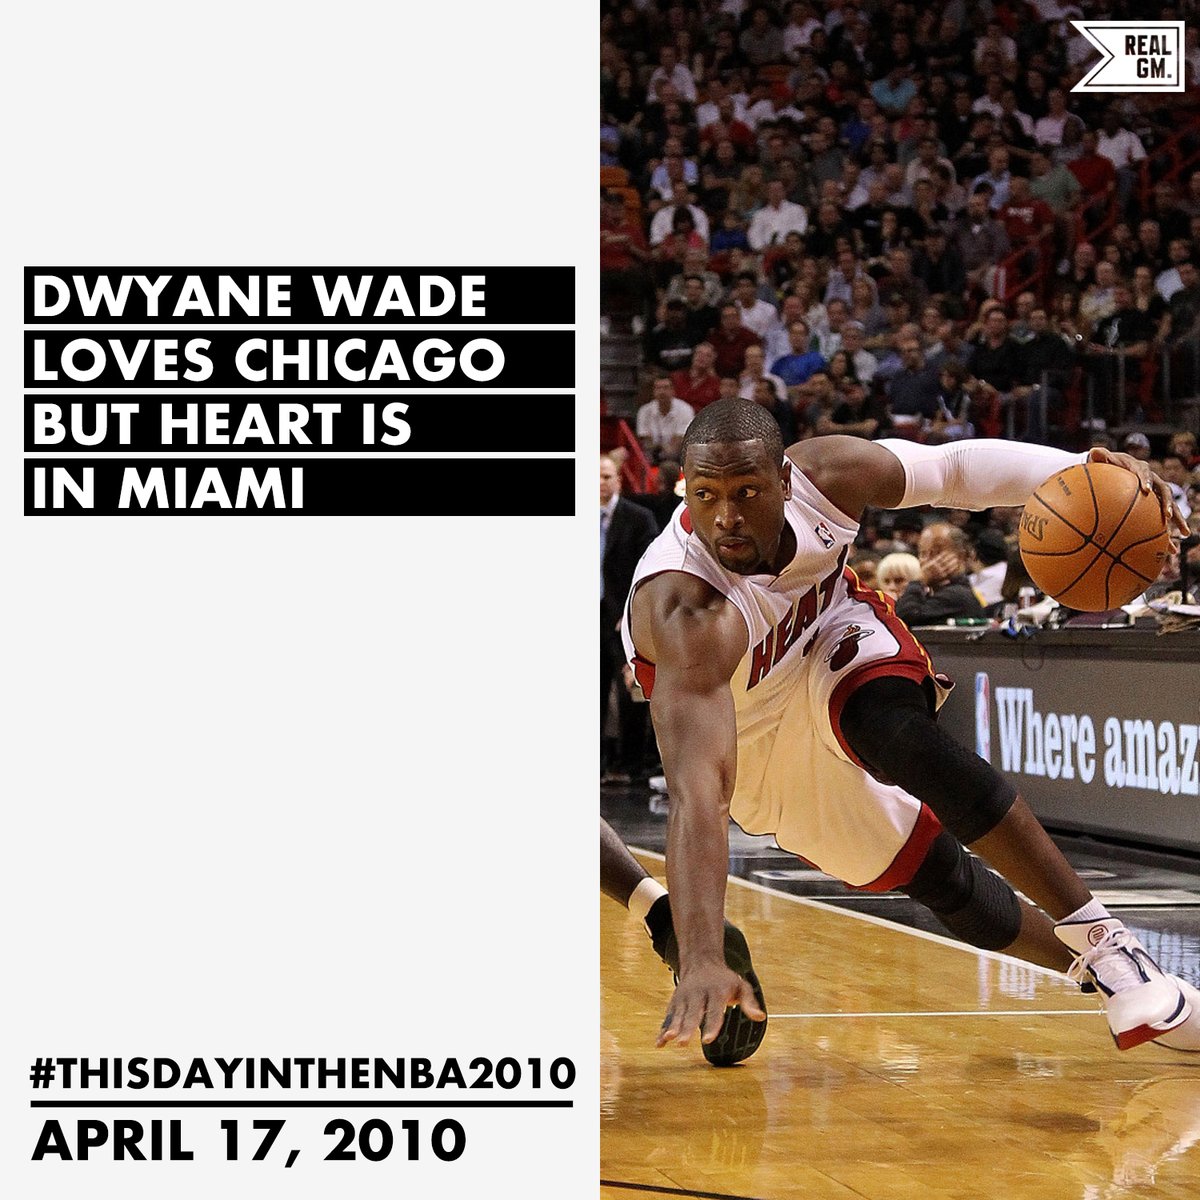  #ThisDayInTheNBA2010April 17, 2010Dwyane Wade Loves Chicago, But Heart Is In Miami https://basketball.realgm.com/wiretap/203349/Dwyane-Wade-Loves-Chicago-But-Heart-Is-In-Miami